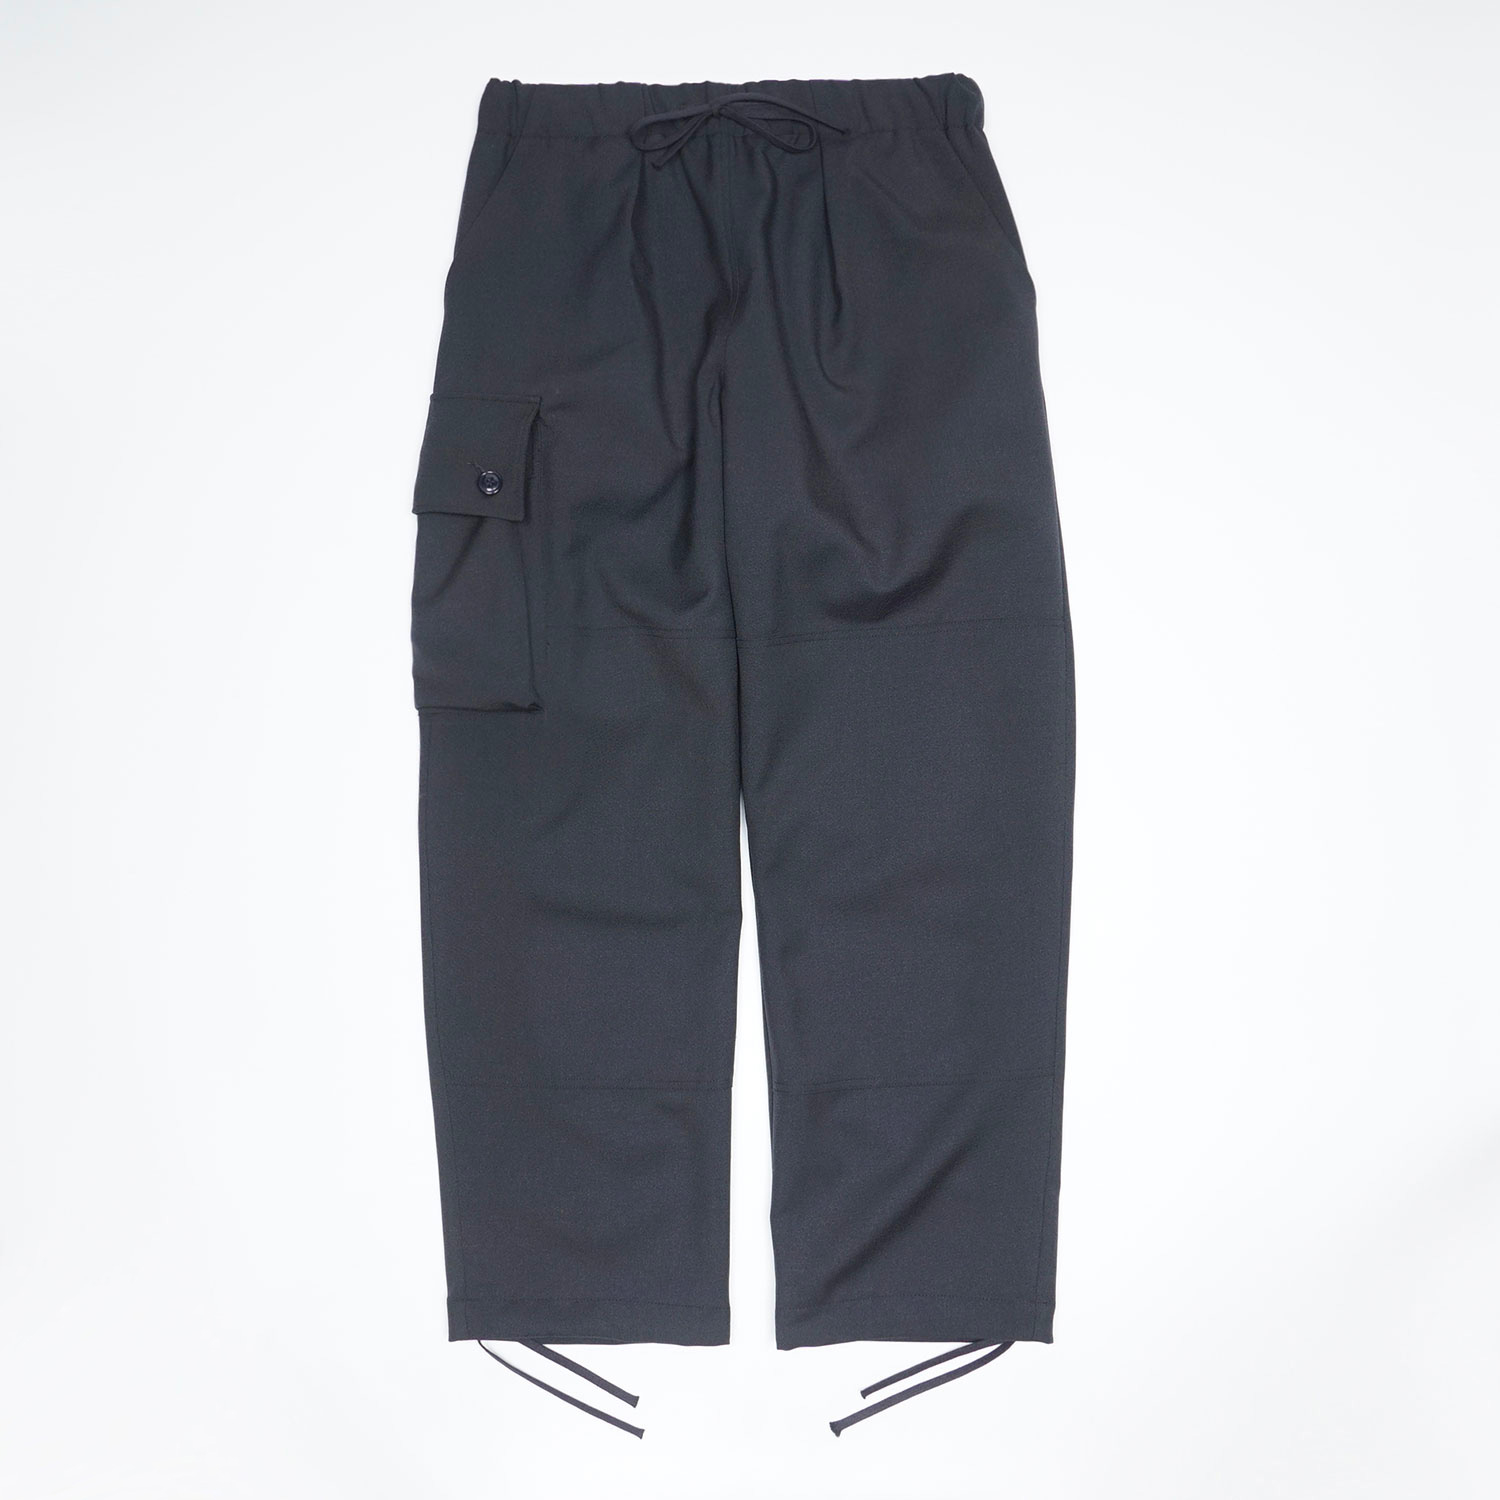 TERA Pants in Midnight blue color by Arpenteur